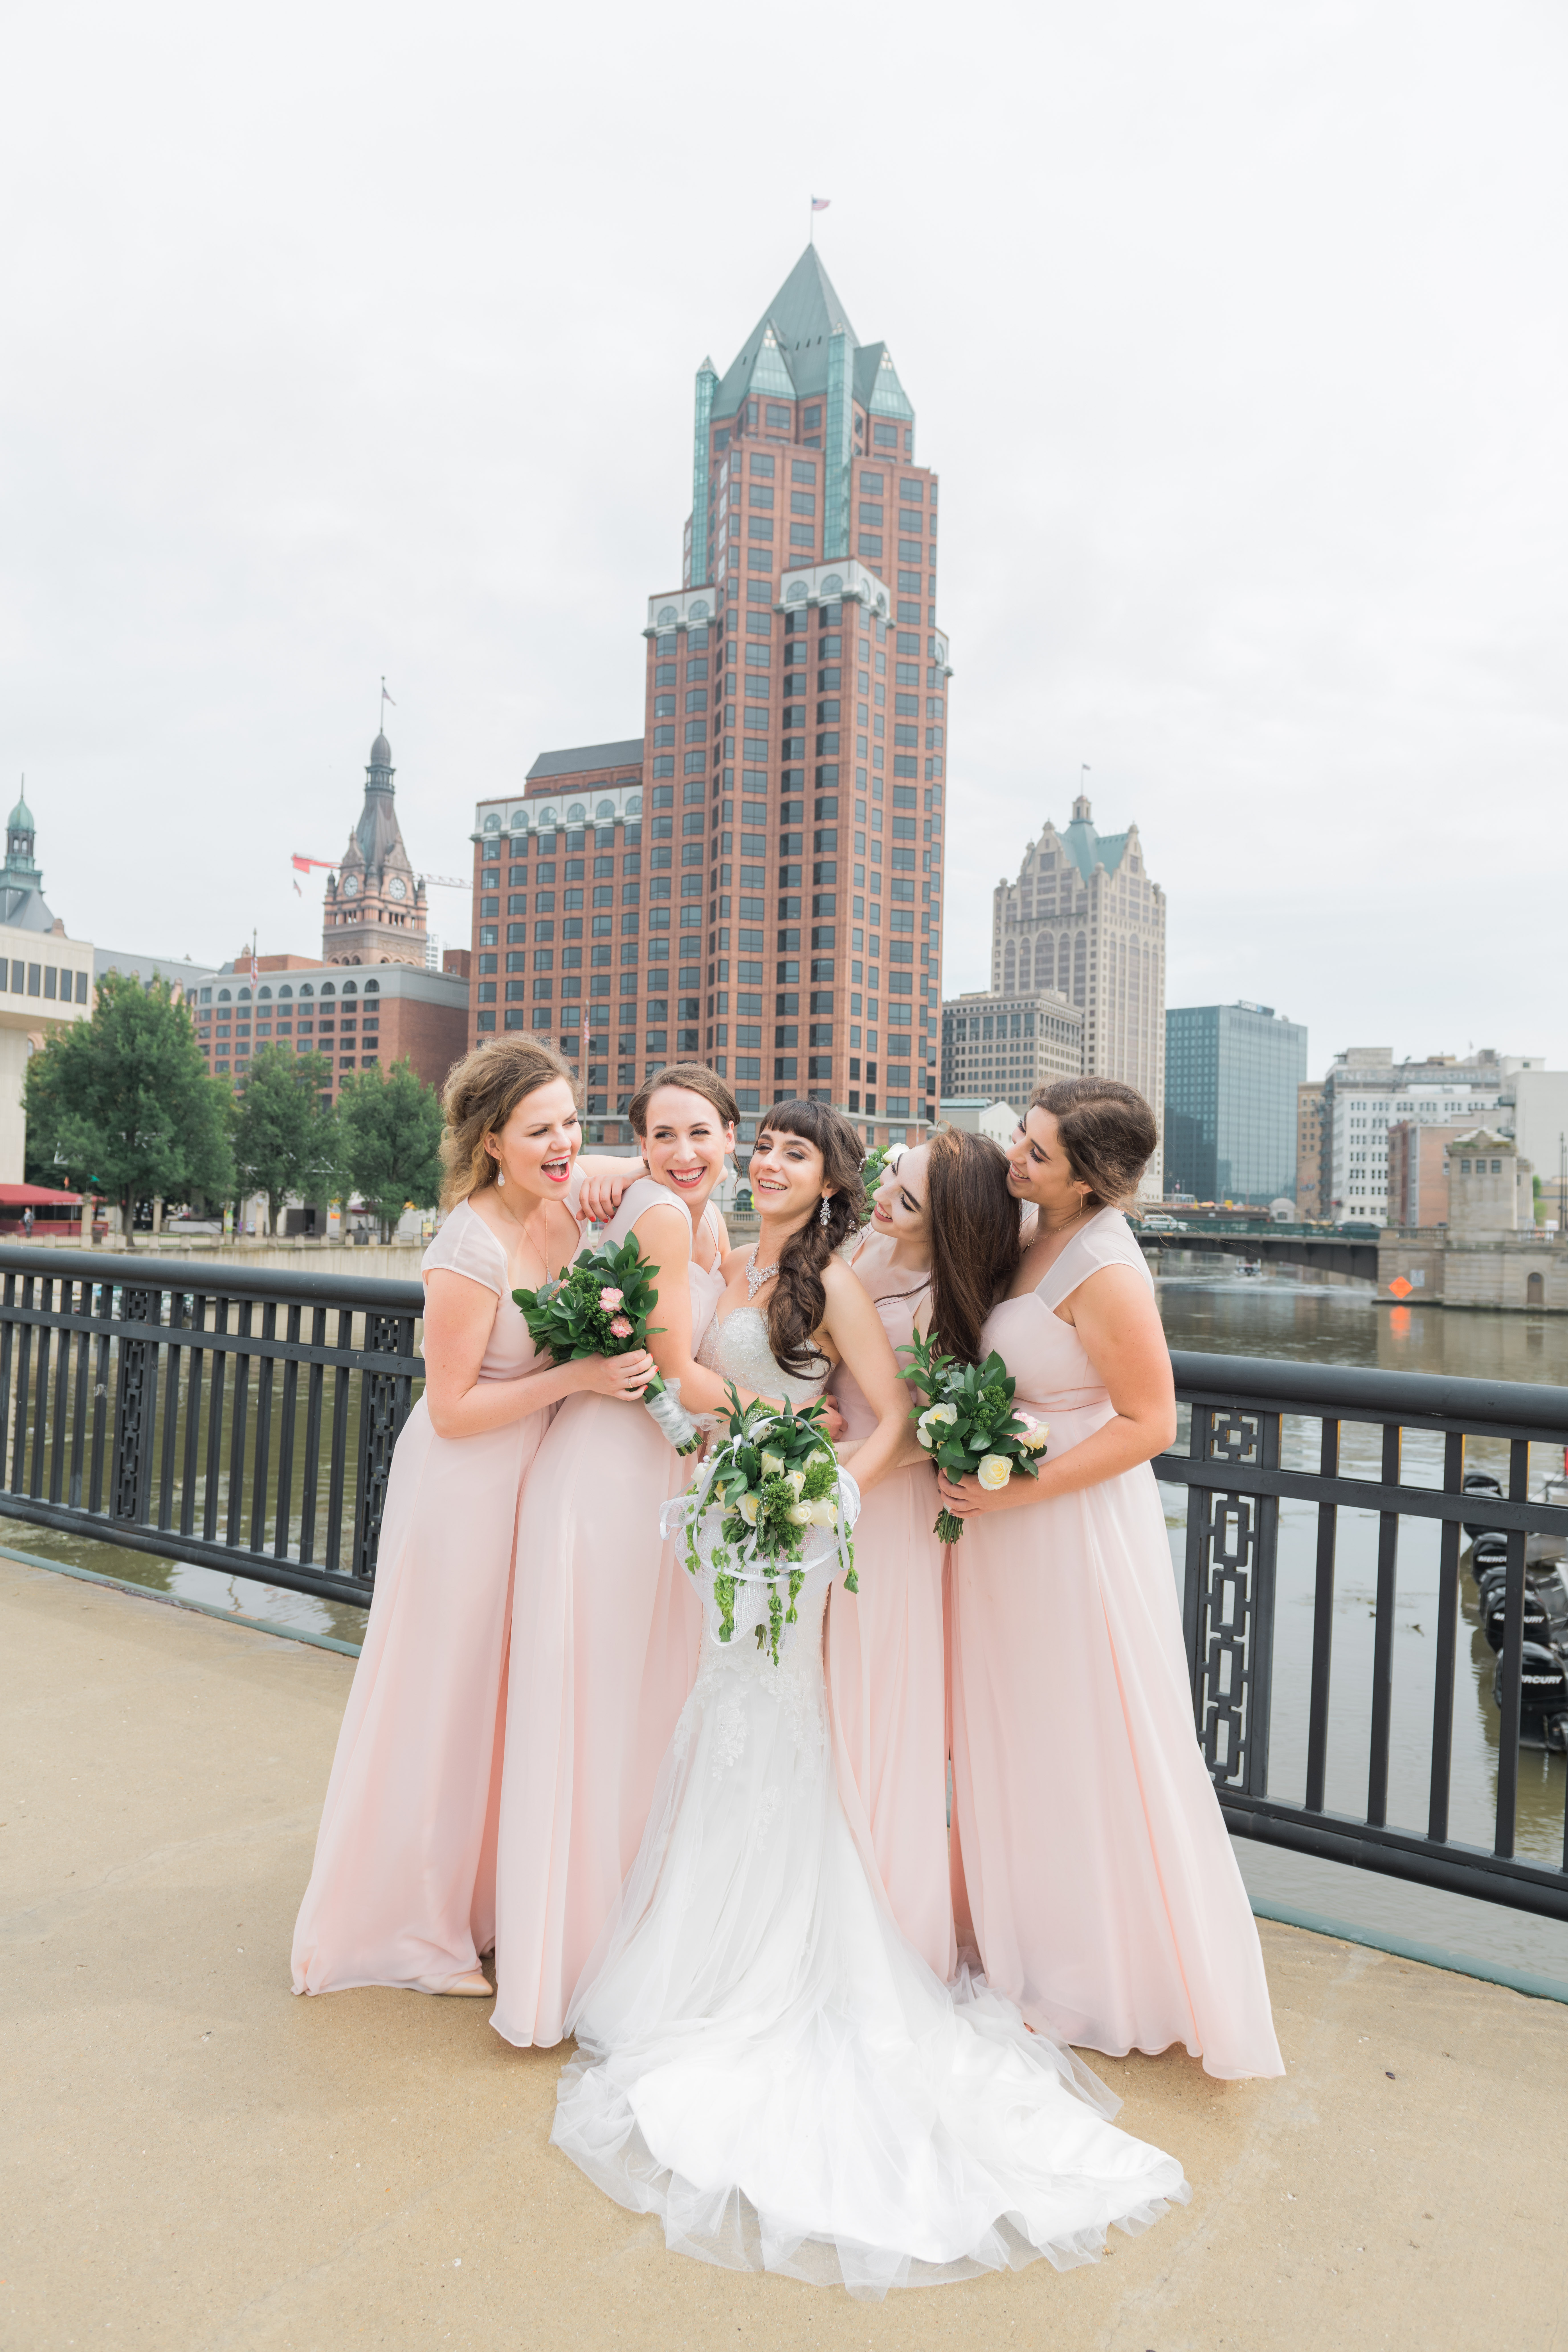 Bridesmaids surround bride smiling at each other by the Milwaukee bridge with large building in the background